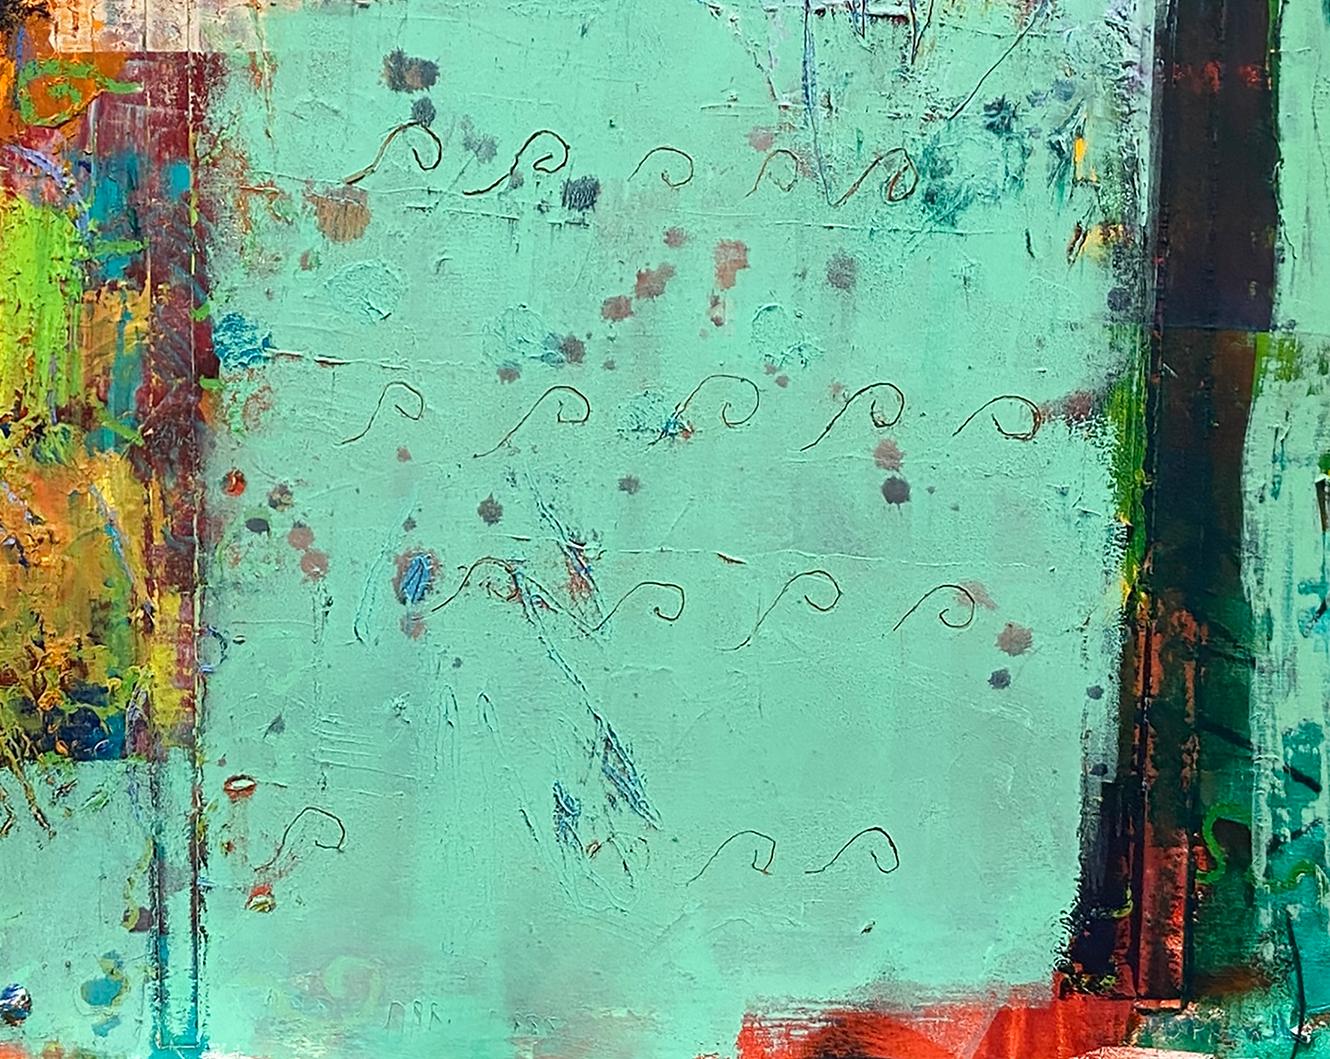 Dredging Up Memories, Original Contemporary Aquamarine and Red Abstract Painting For Sale 1